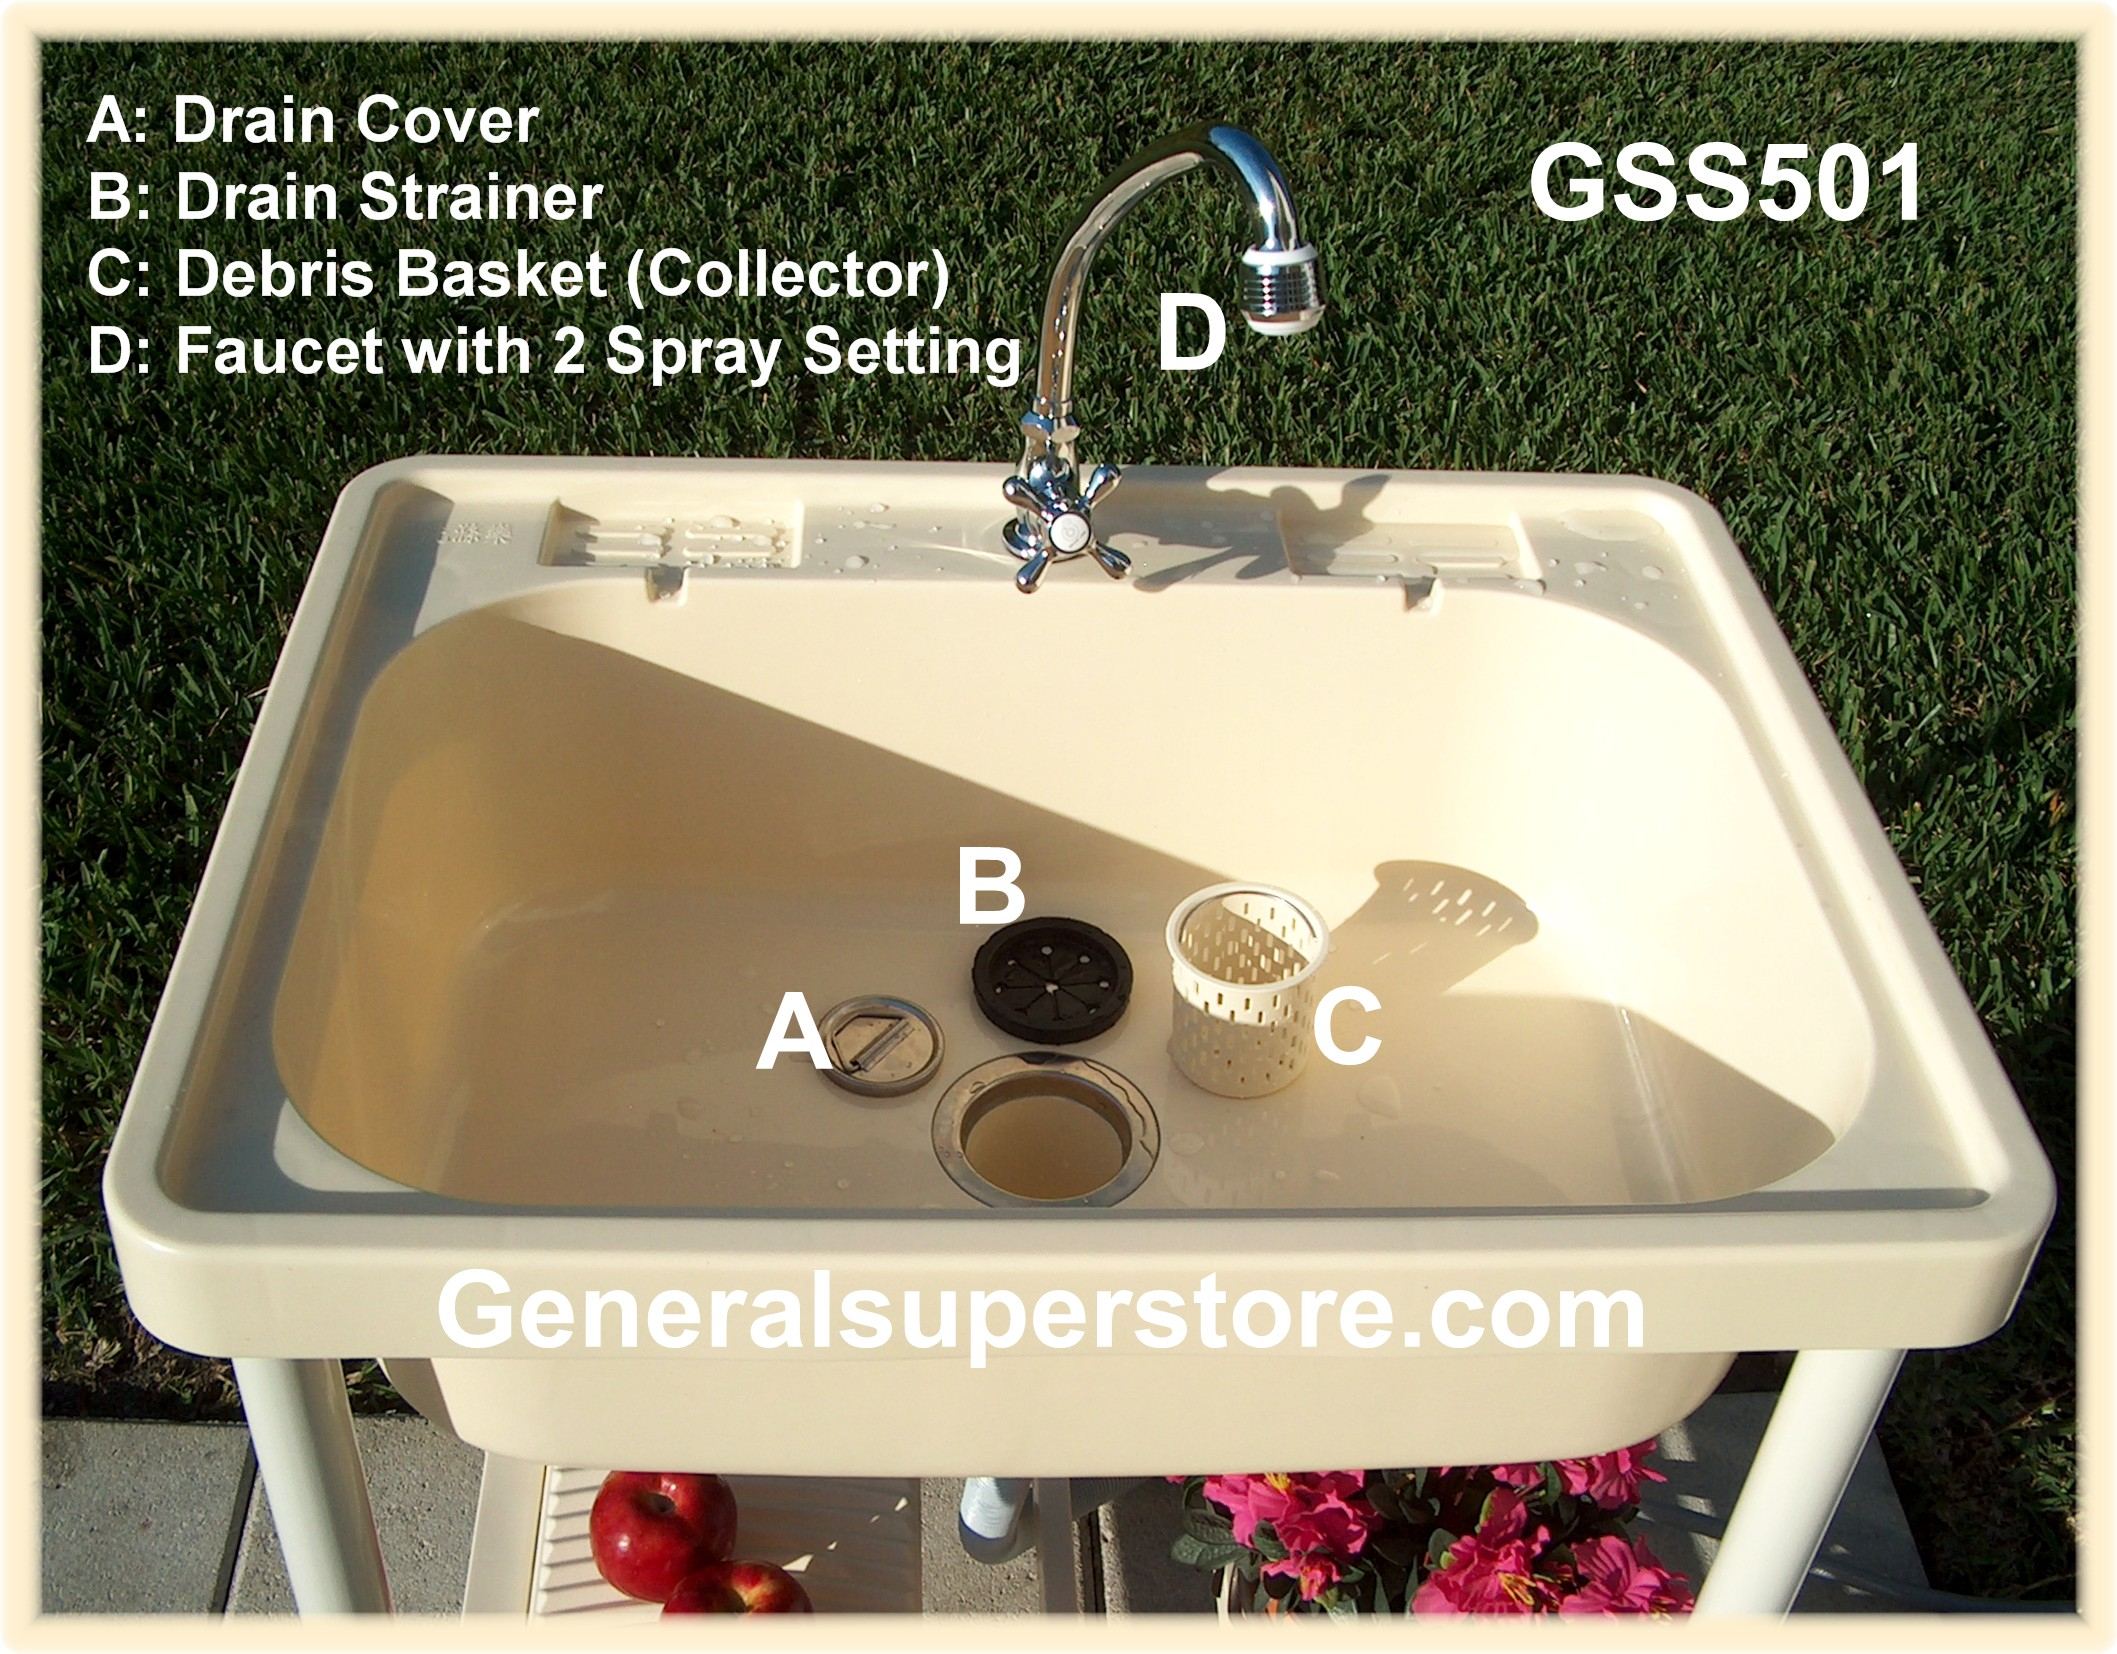 Starling Travel Camping Sink From General Superstore in size 2117 X 1654